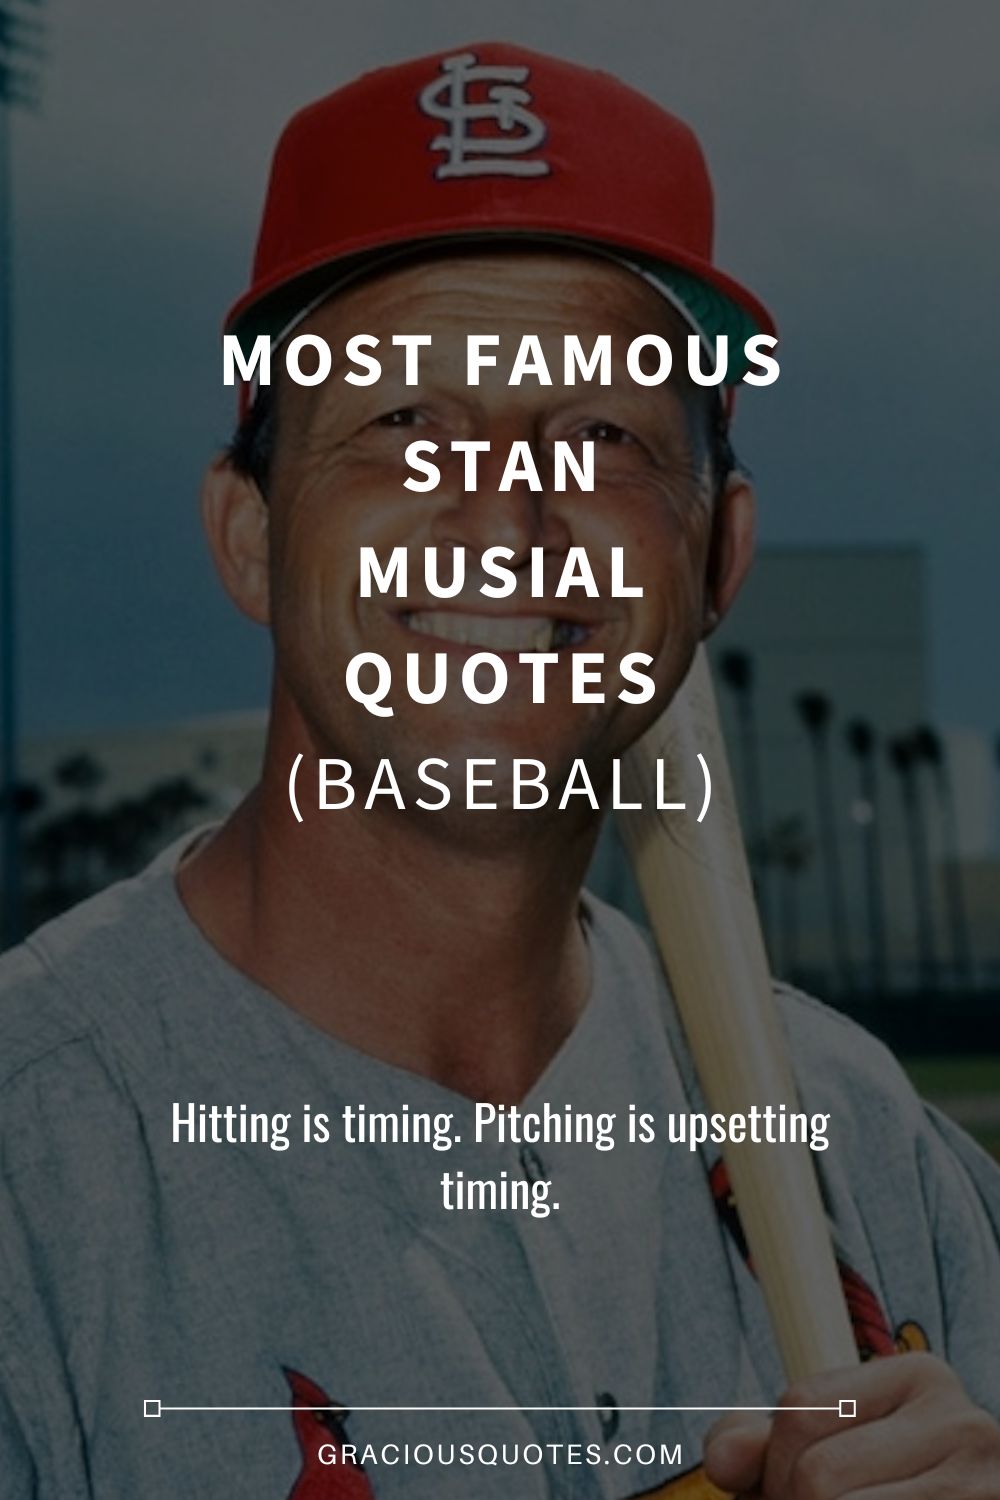 Most Famous Stan Musial Quotes (BASEBALL) - Gracious Quotes